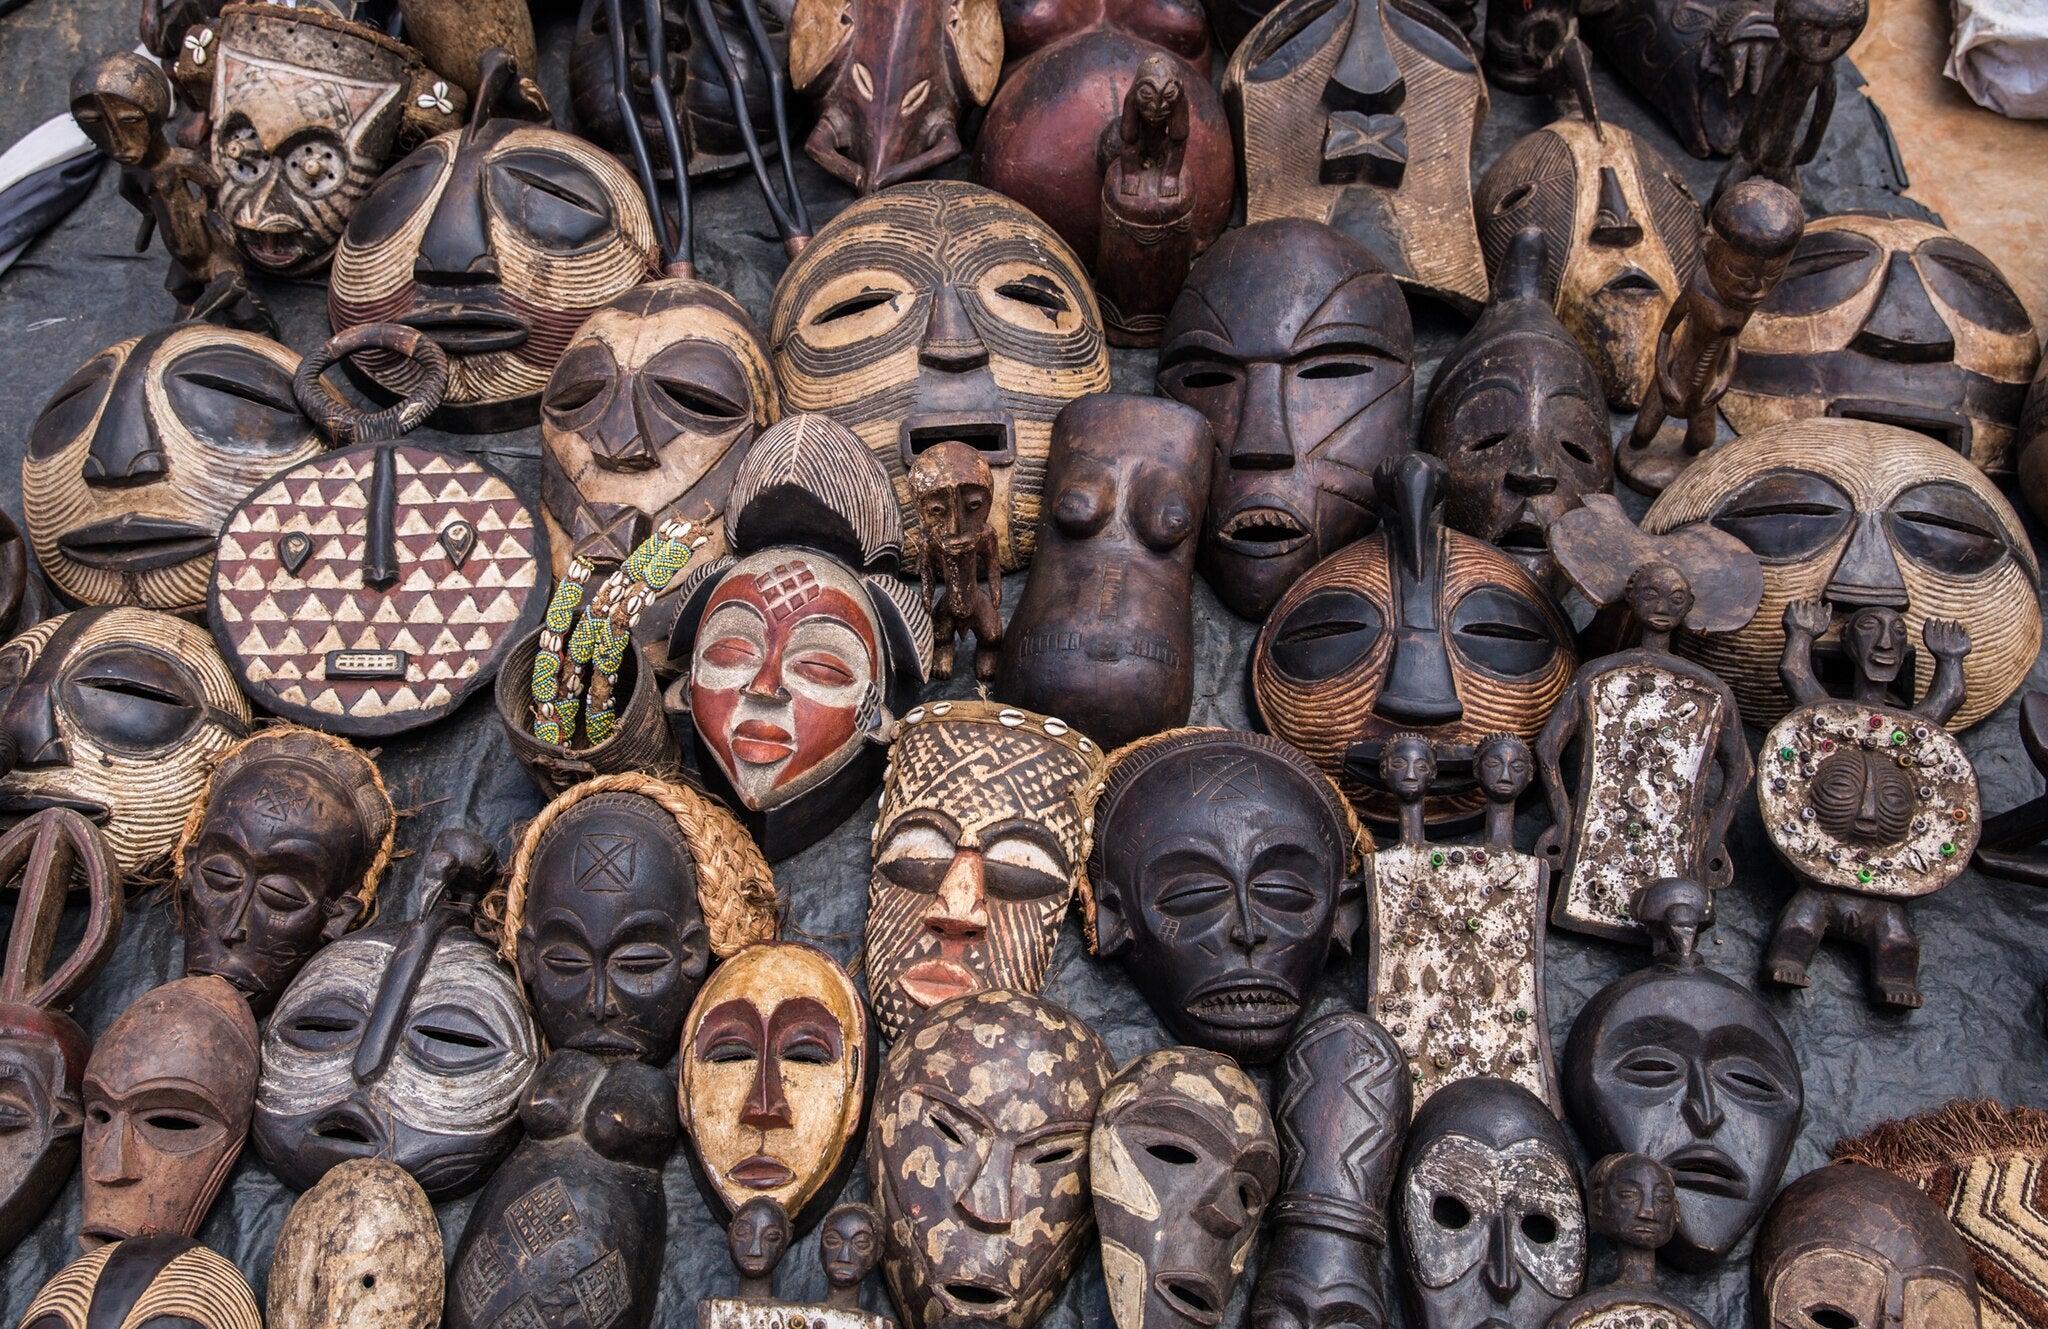 Collection of African Tribal Art Alt: A collection of African tribal art wooden masks